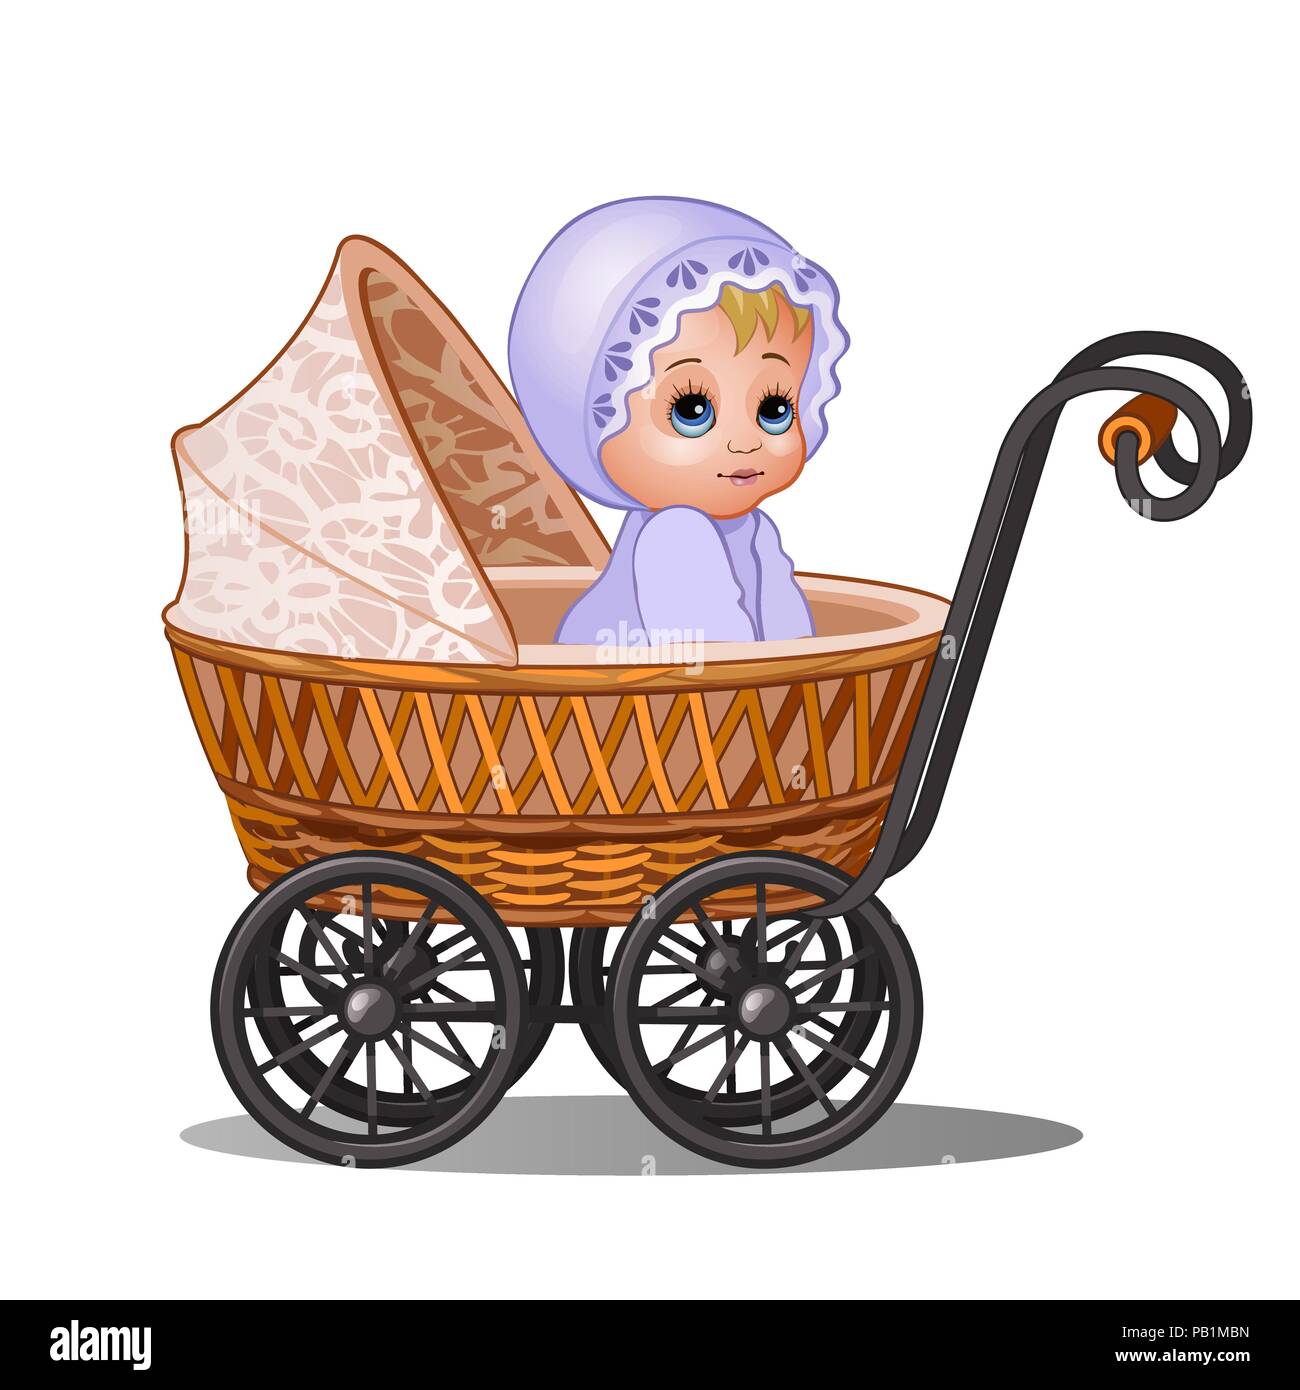 Little girl sitting in a vintage stroller isolated on white background. Vector cartoon close-up illustration. Stock Vector